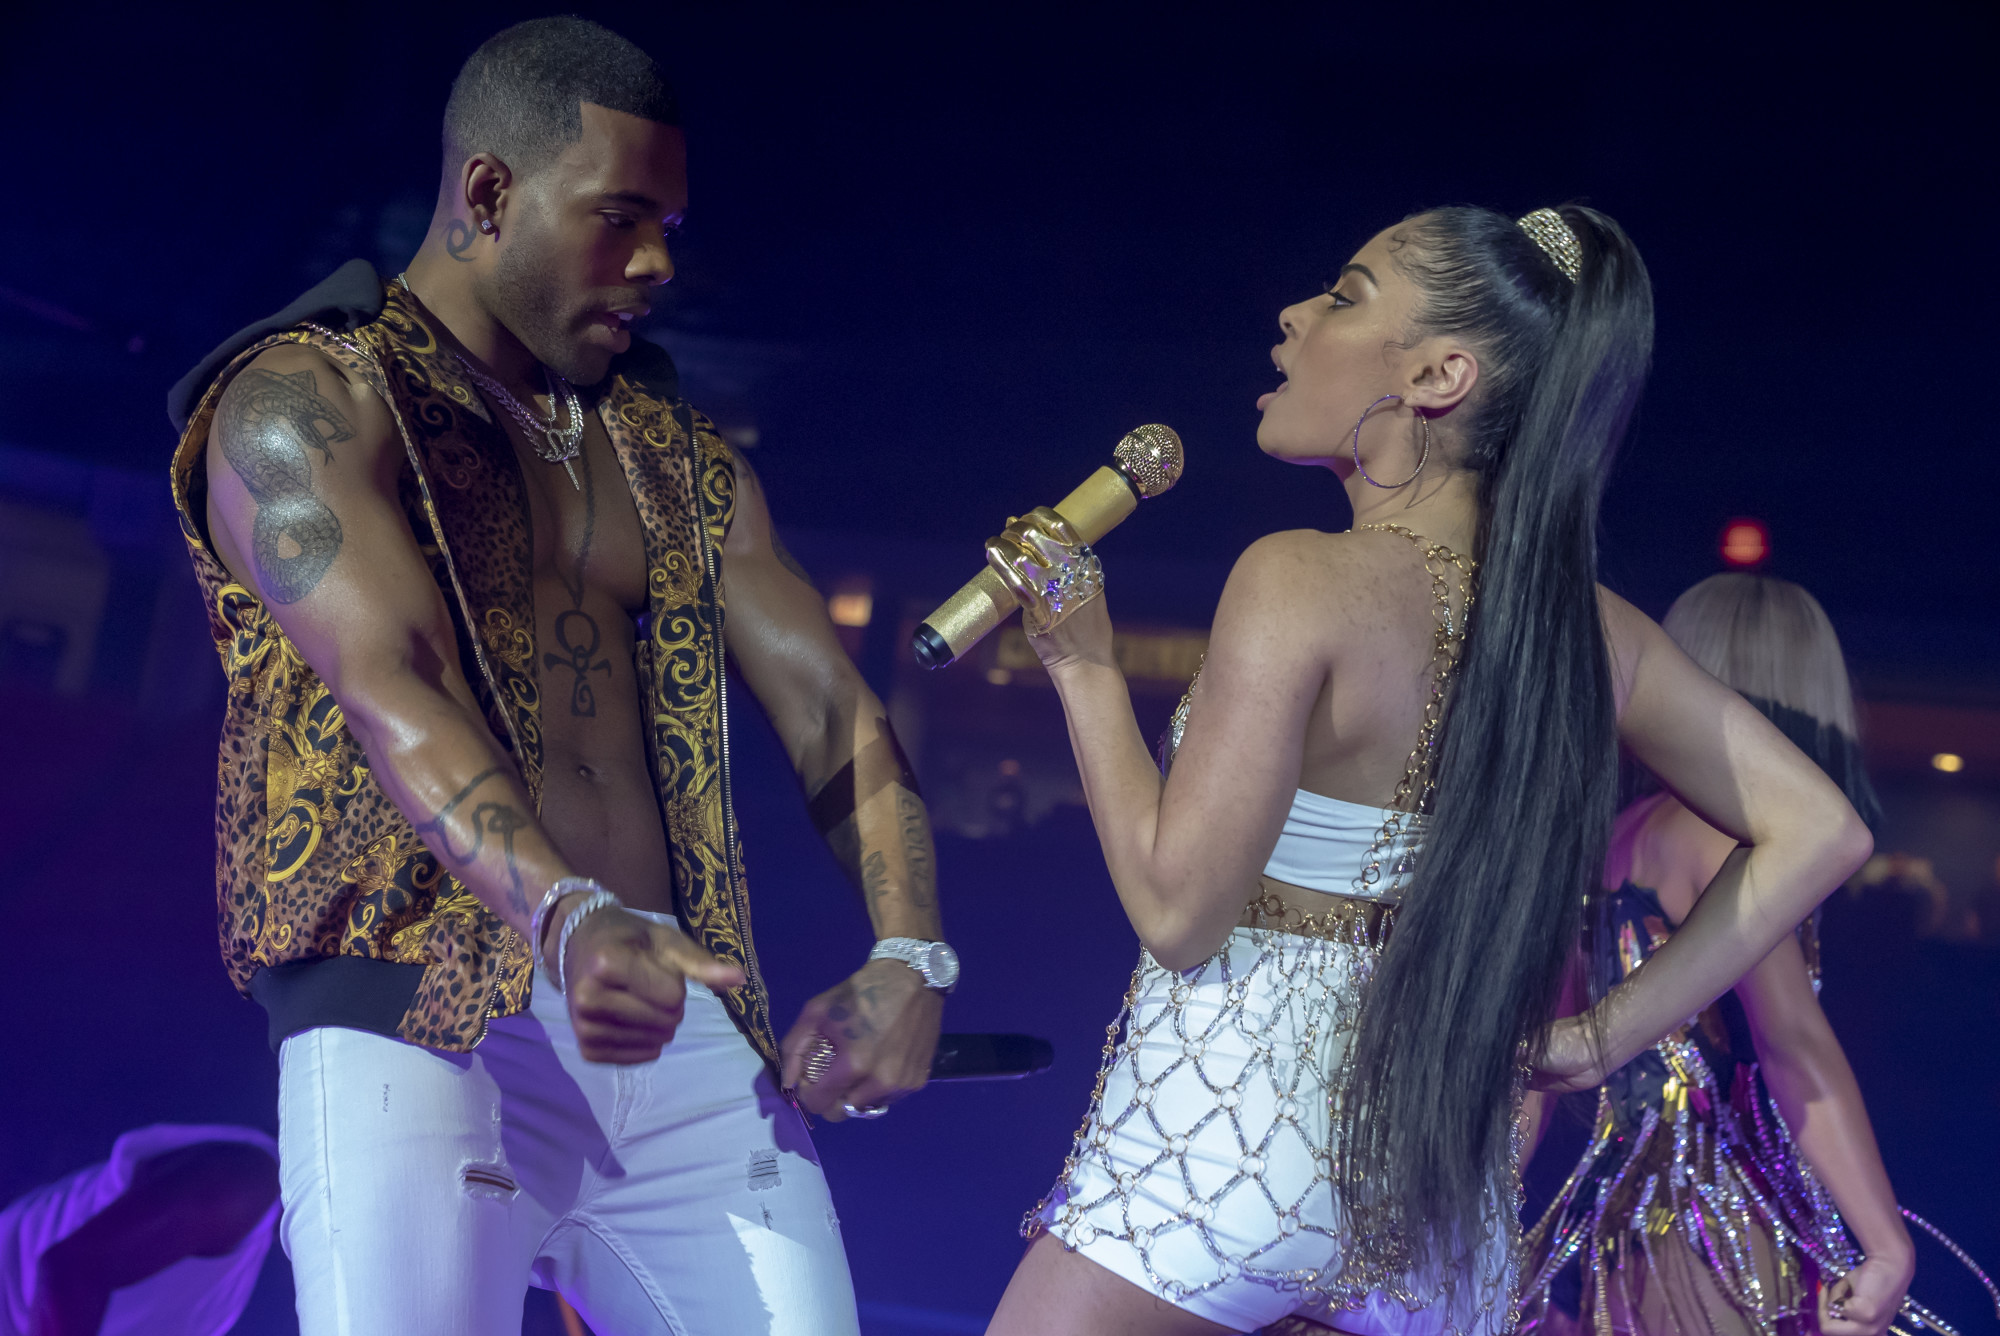 EMPIRE: L-R: Mario and Katlynn Simone in the "What Is Love" season premiere episode of EMPIRE airing Tuesday, Sept. 24 (9:00-10:00 PM ET/PT) on FOX. ©2019 Fox Broadcasting Co. All Rights Reserved. CR: Chuck Hodes/FOX.